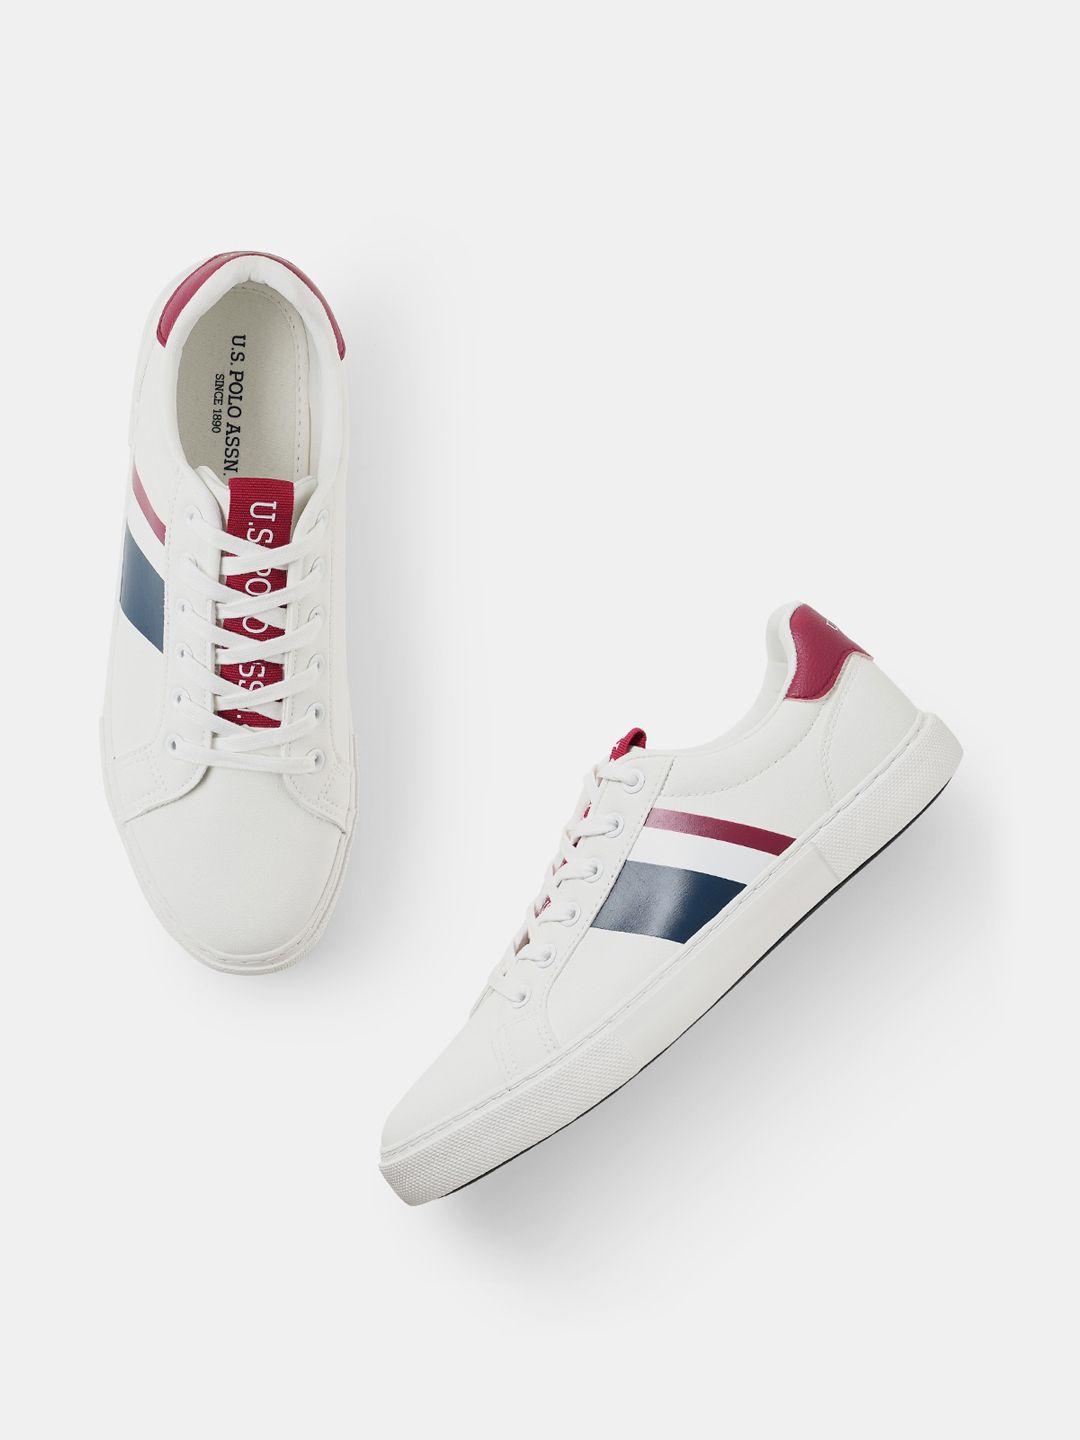 u.s. polo assn. men lace-up sneakers